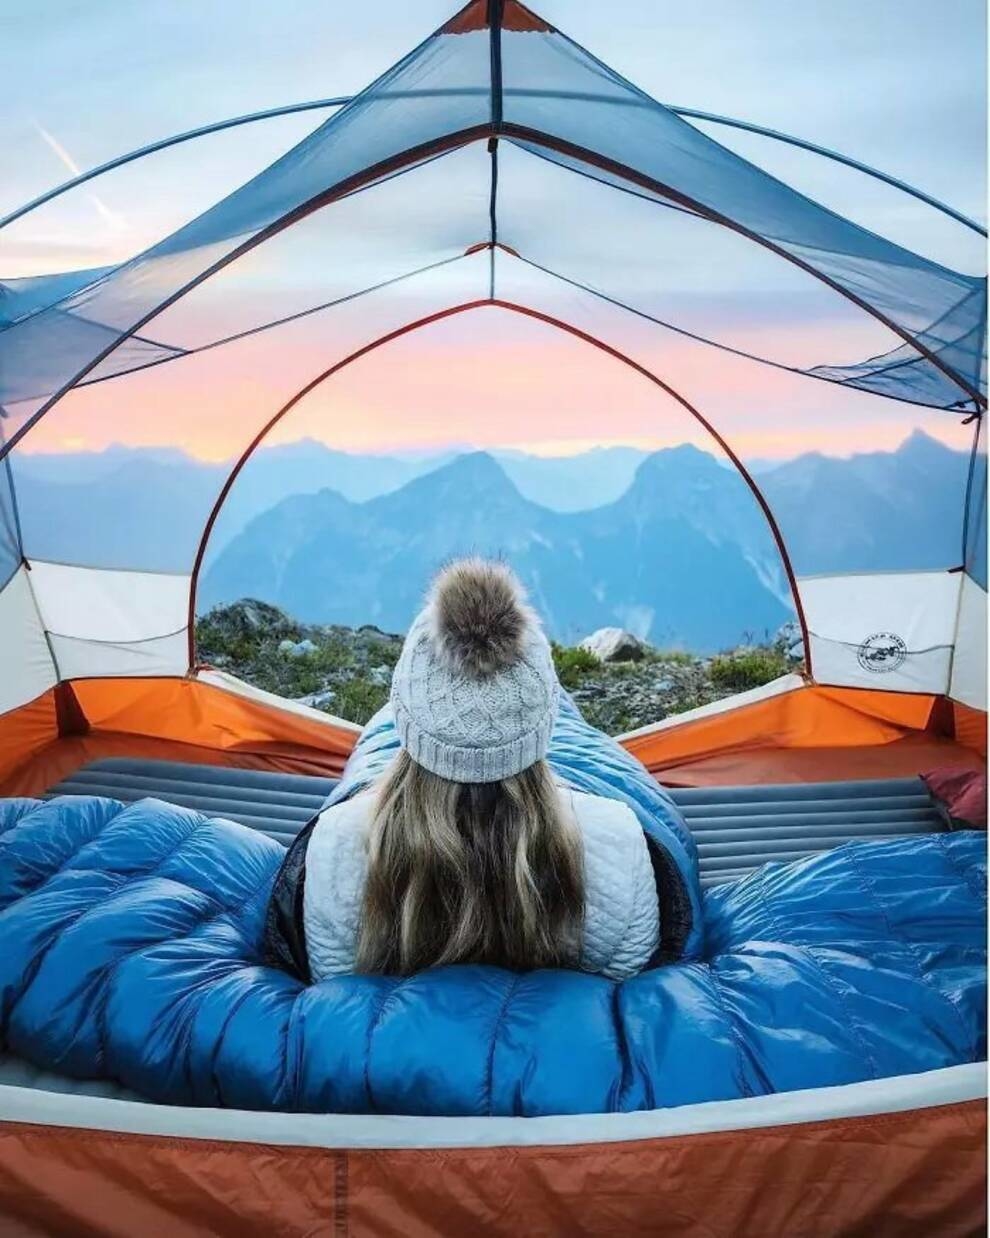 A room with a billion stars: netizens travel in transparent tents (Photos)